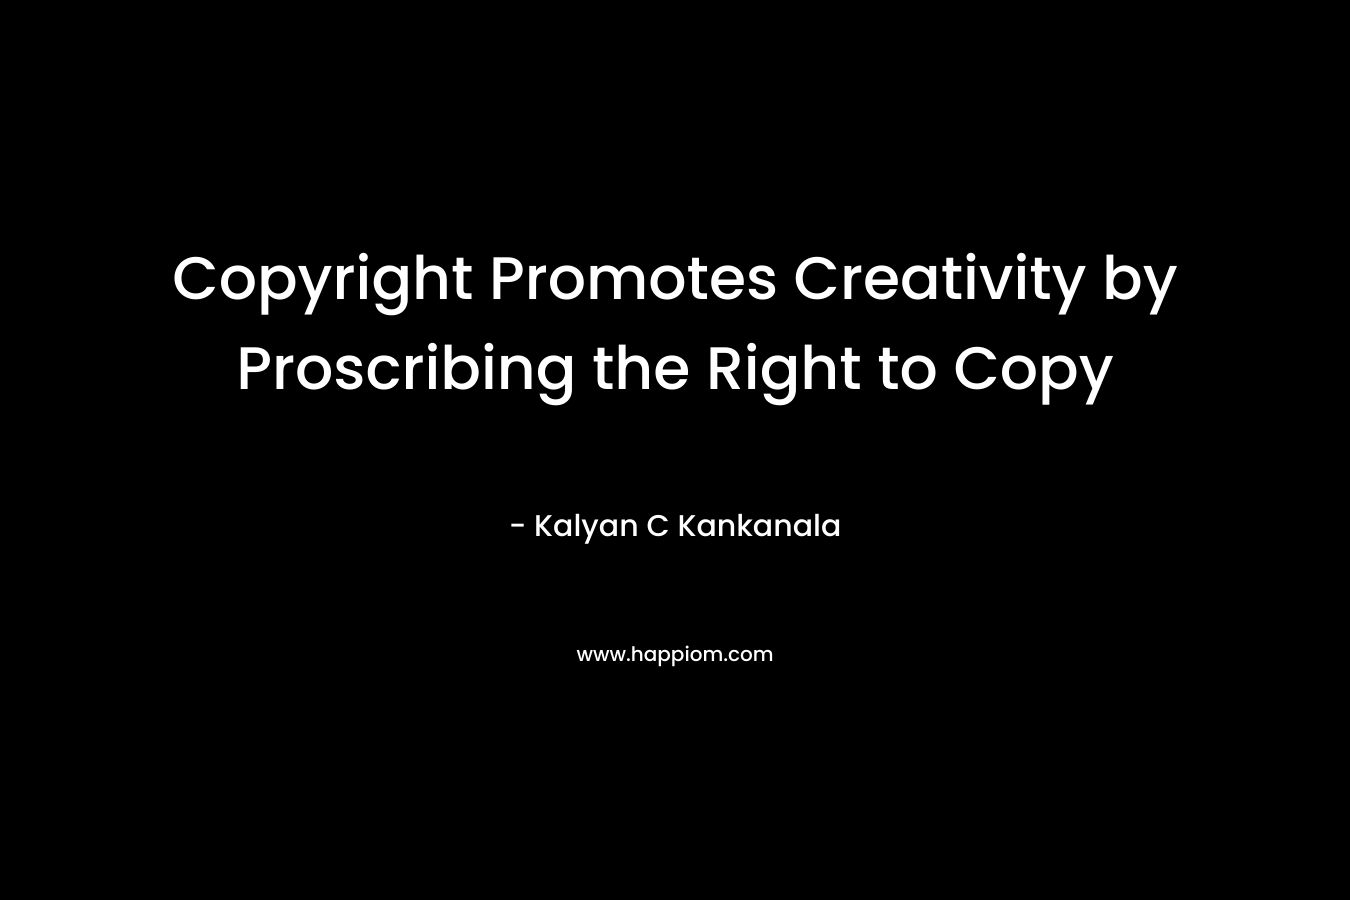 Copyright Promotes Creativity by Proscribing the Right to Copy